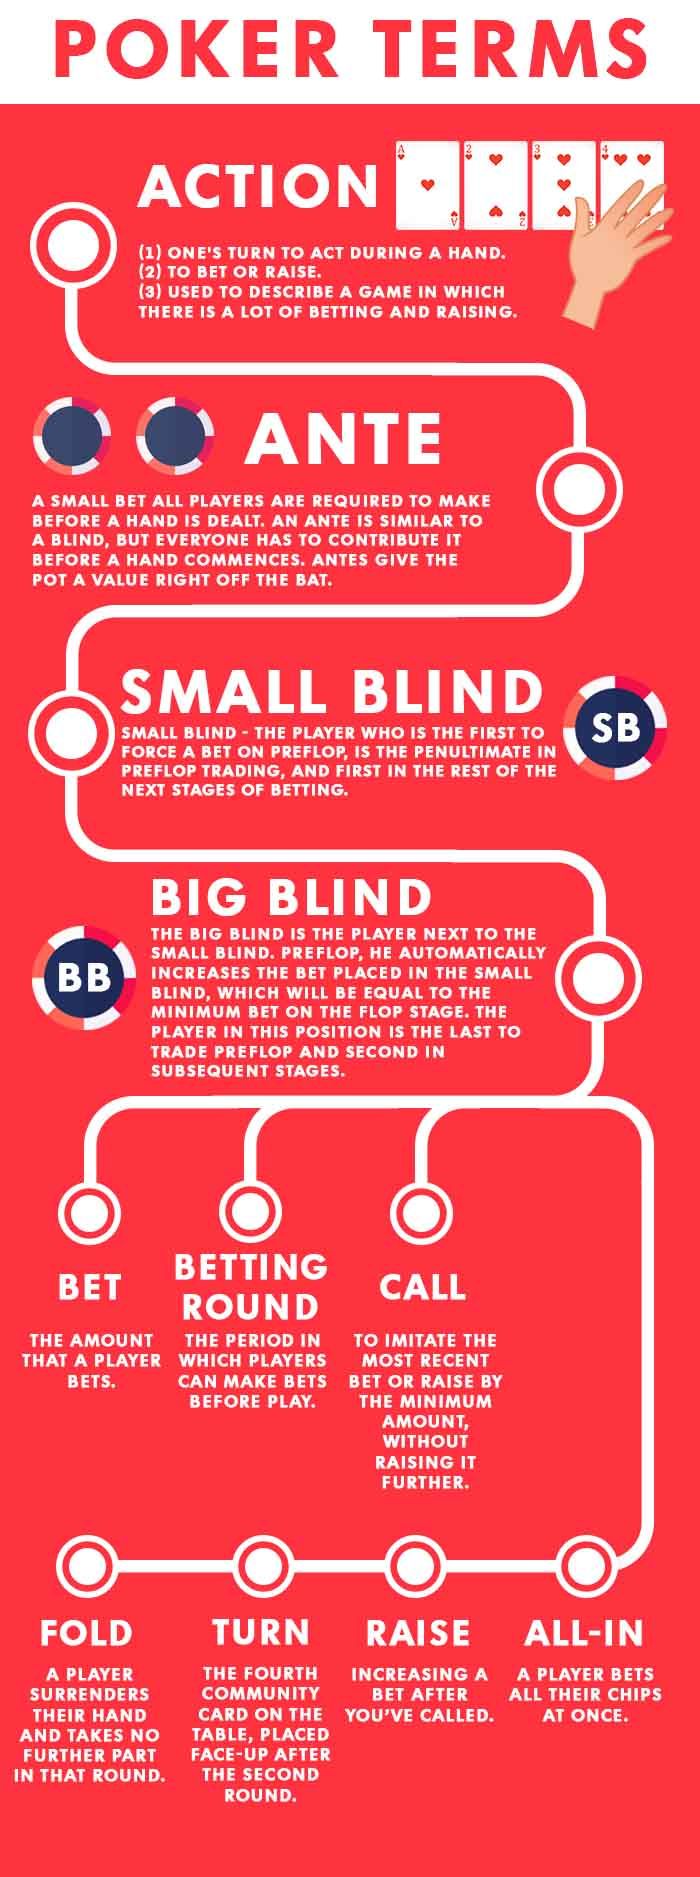 What is a pot in poker terminology?